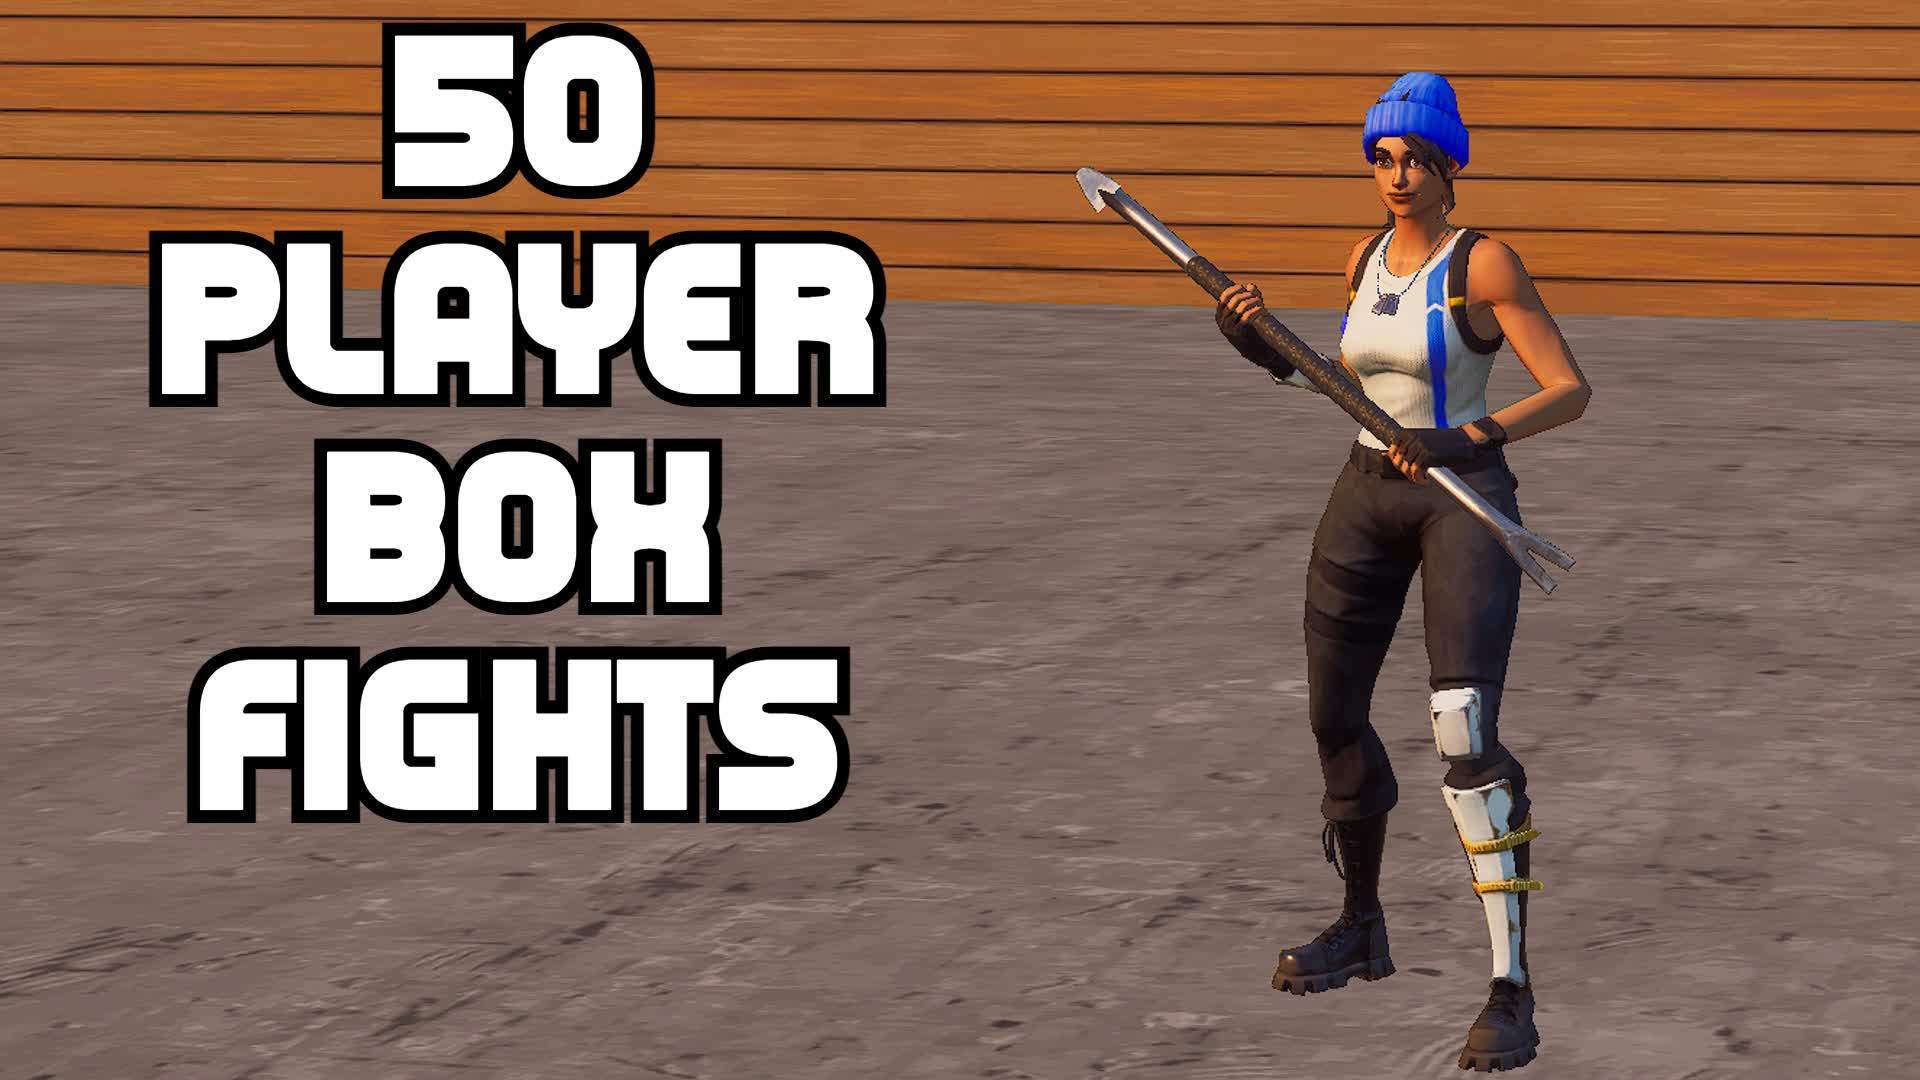 50 Player Box Fights